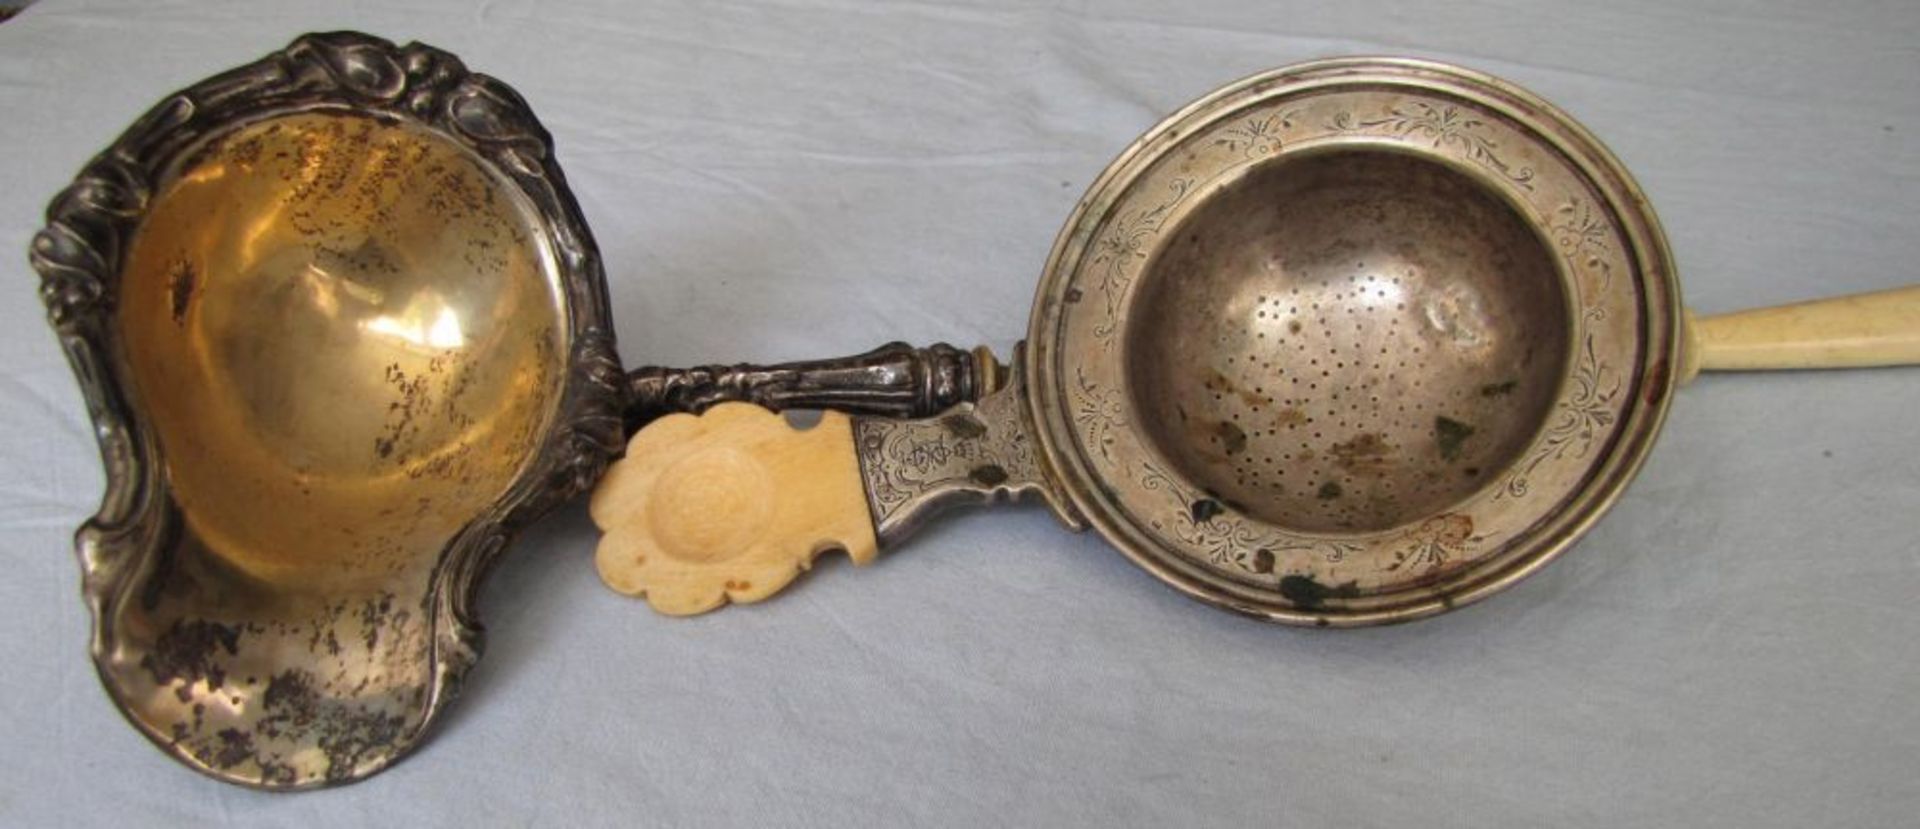 Ladle and strainer probably silver, with bone handles. 238 grams gross.  43 cm long. No Hallmarks